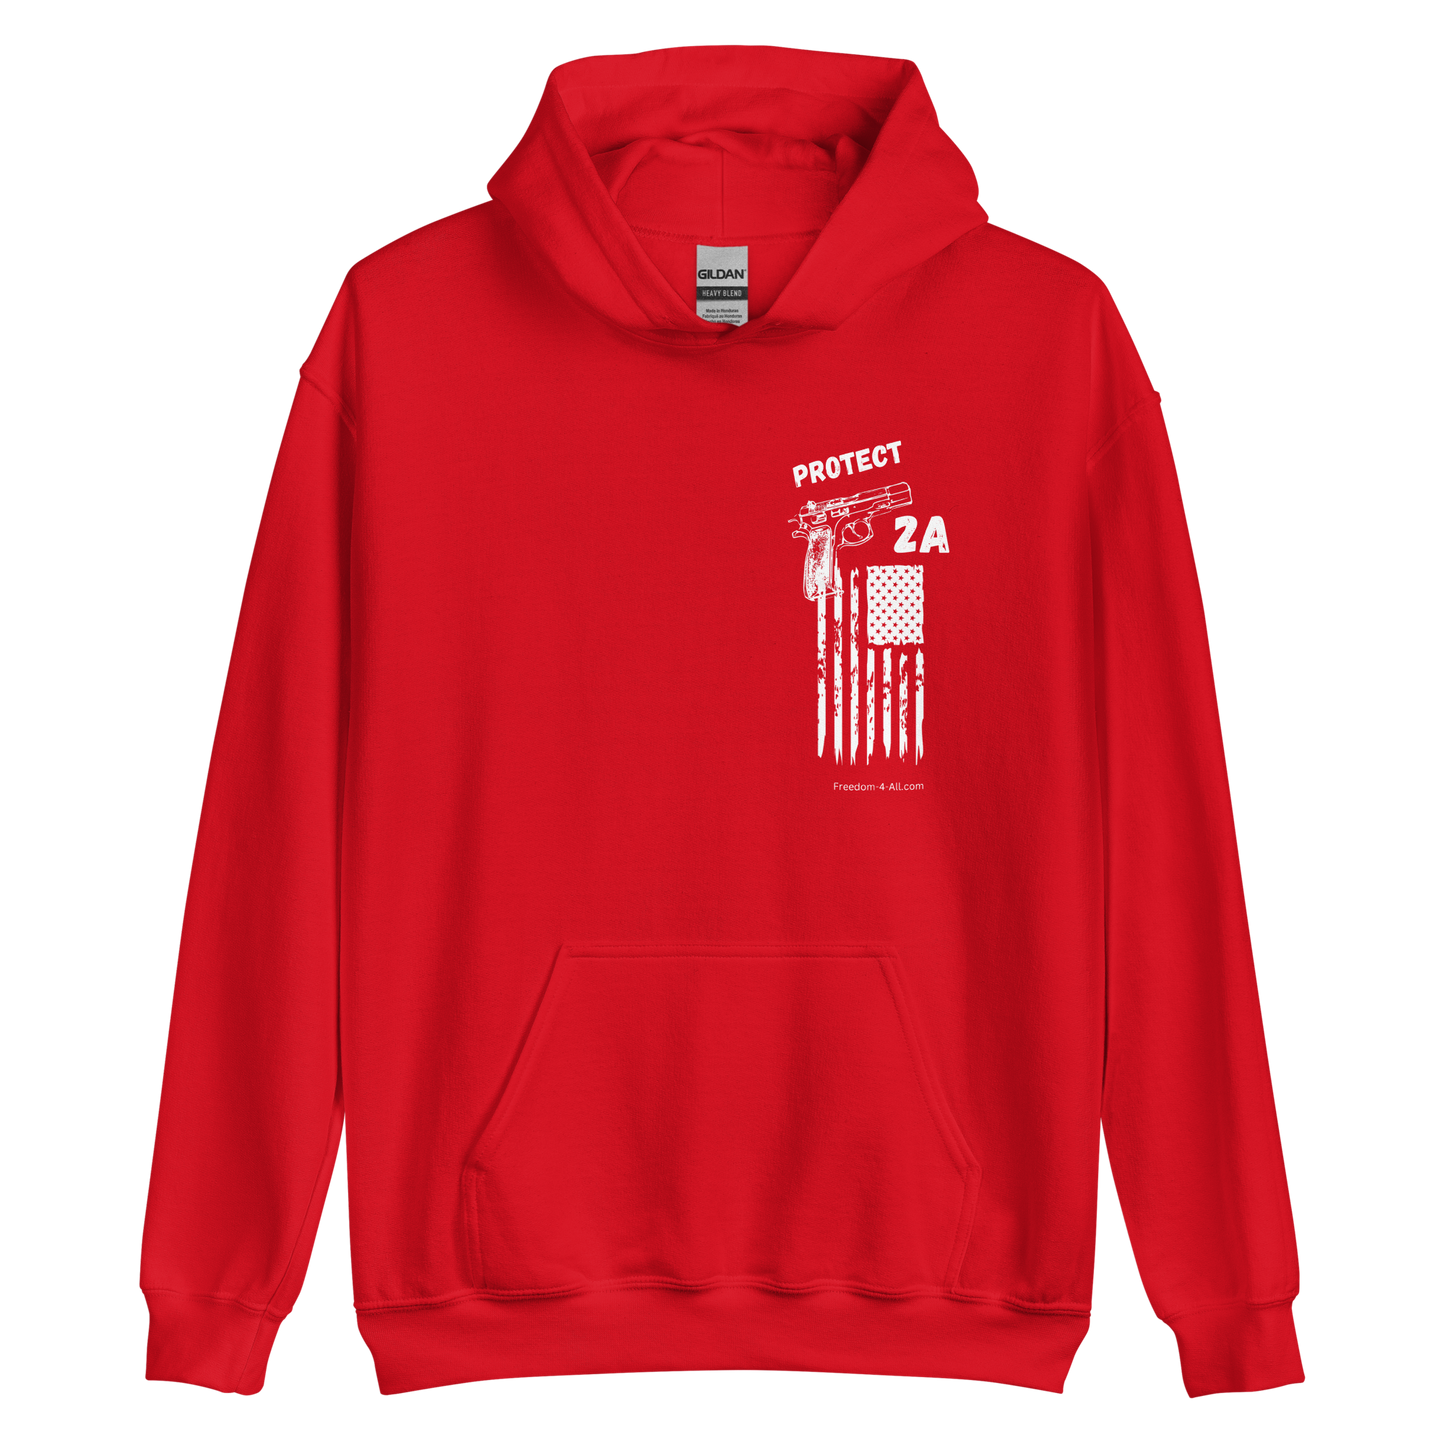 (2A-01) Protect 2A Unisex Hoodie